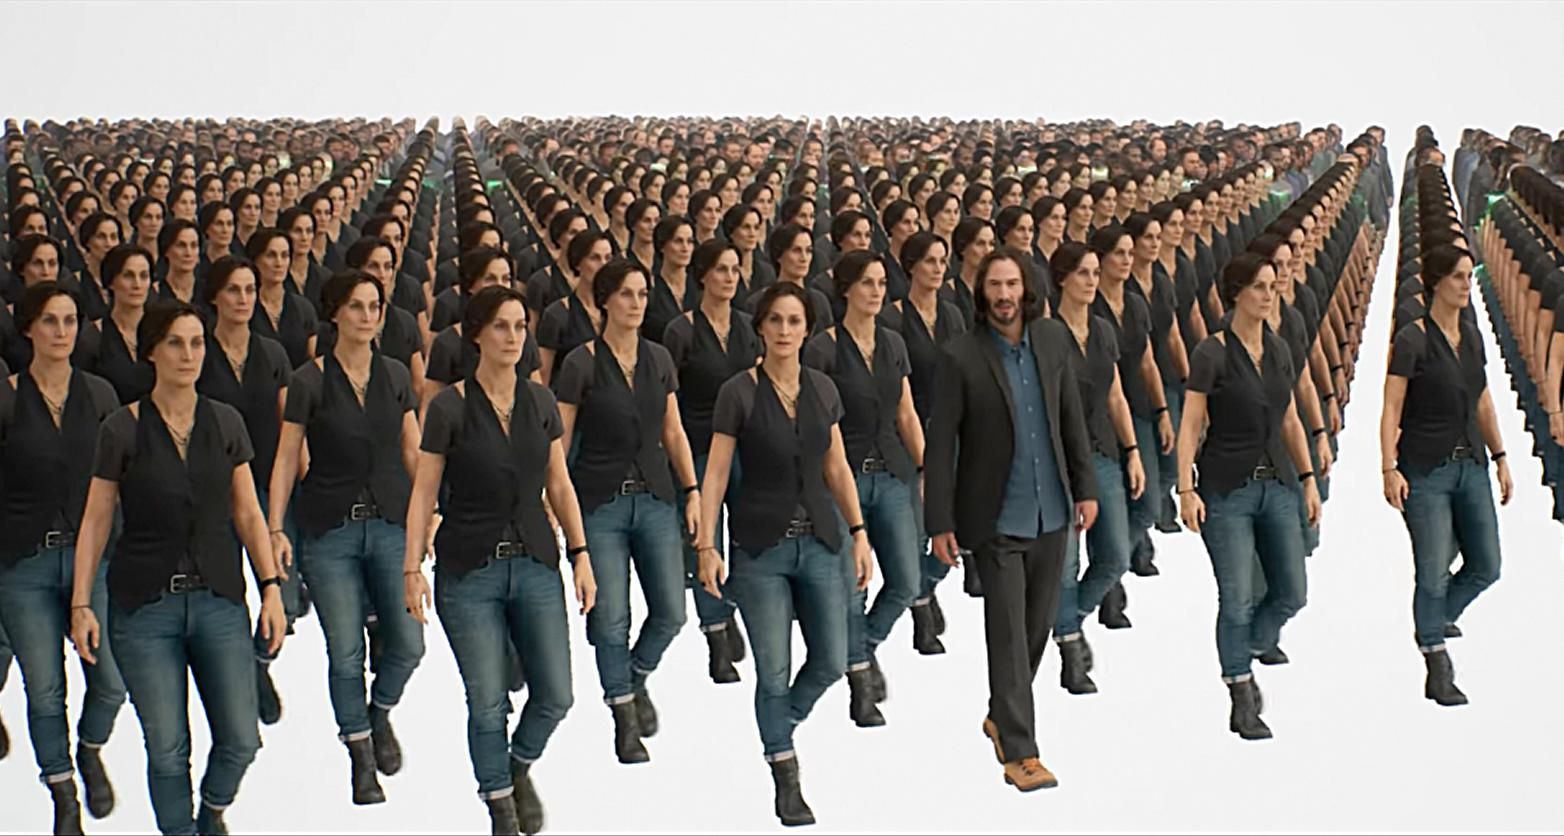 A female avatar is repeated endlessly in rows. In the front of one area is the same avatar positioned slightly differently, next to a male avatar.